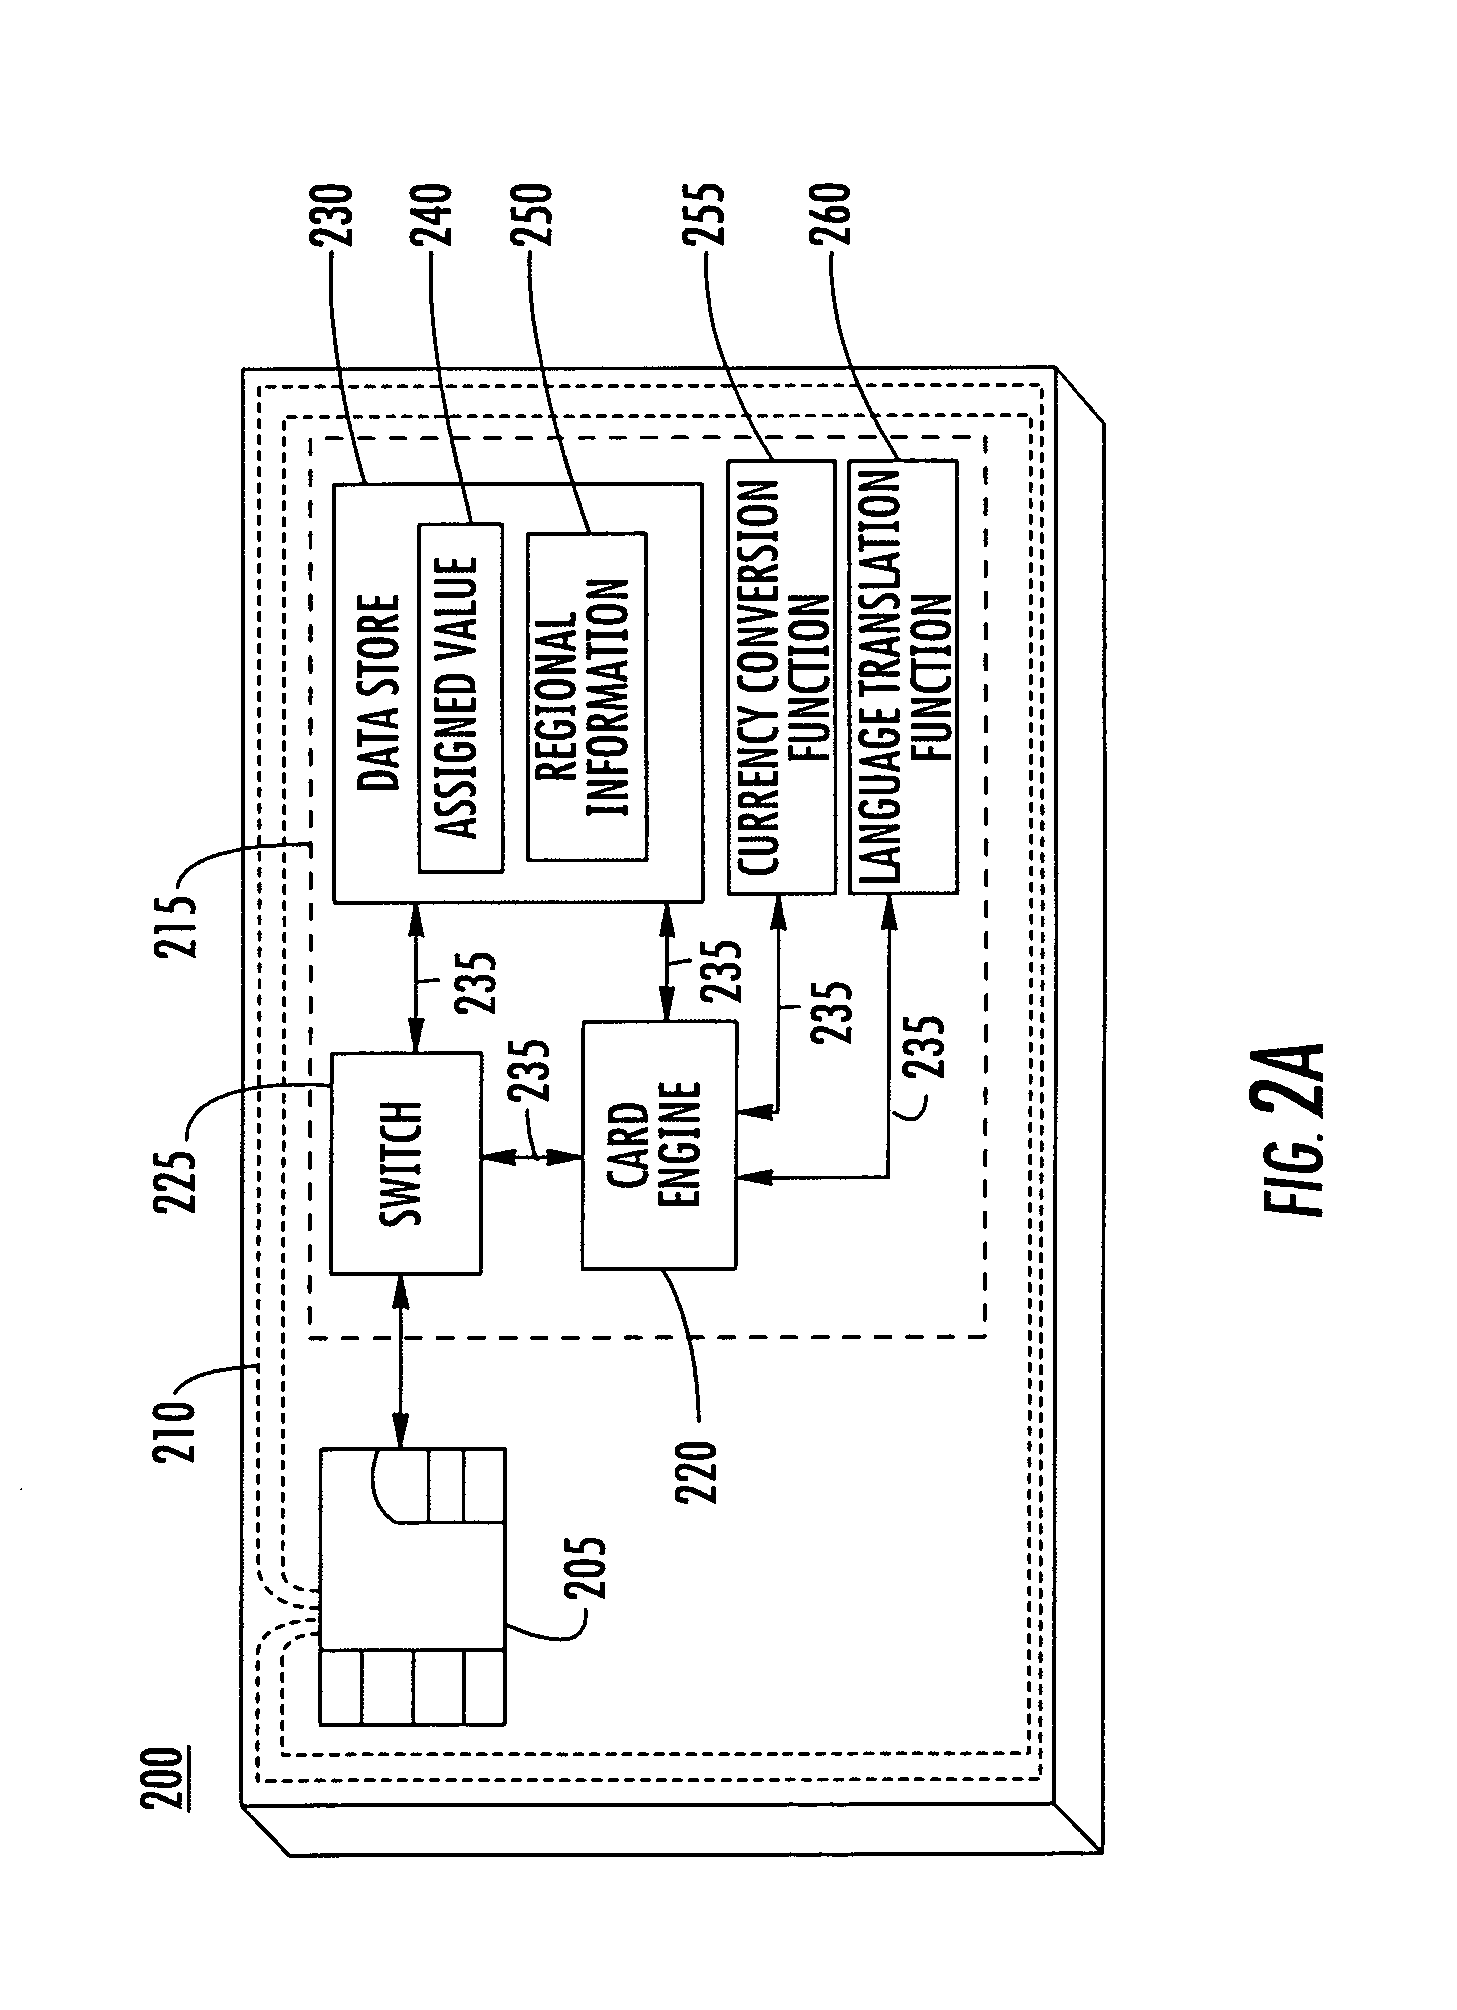 Communications device and card